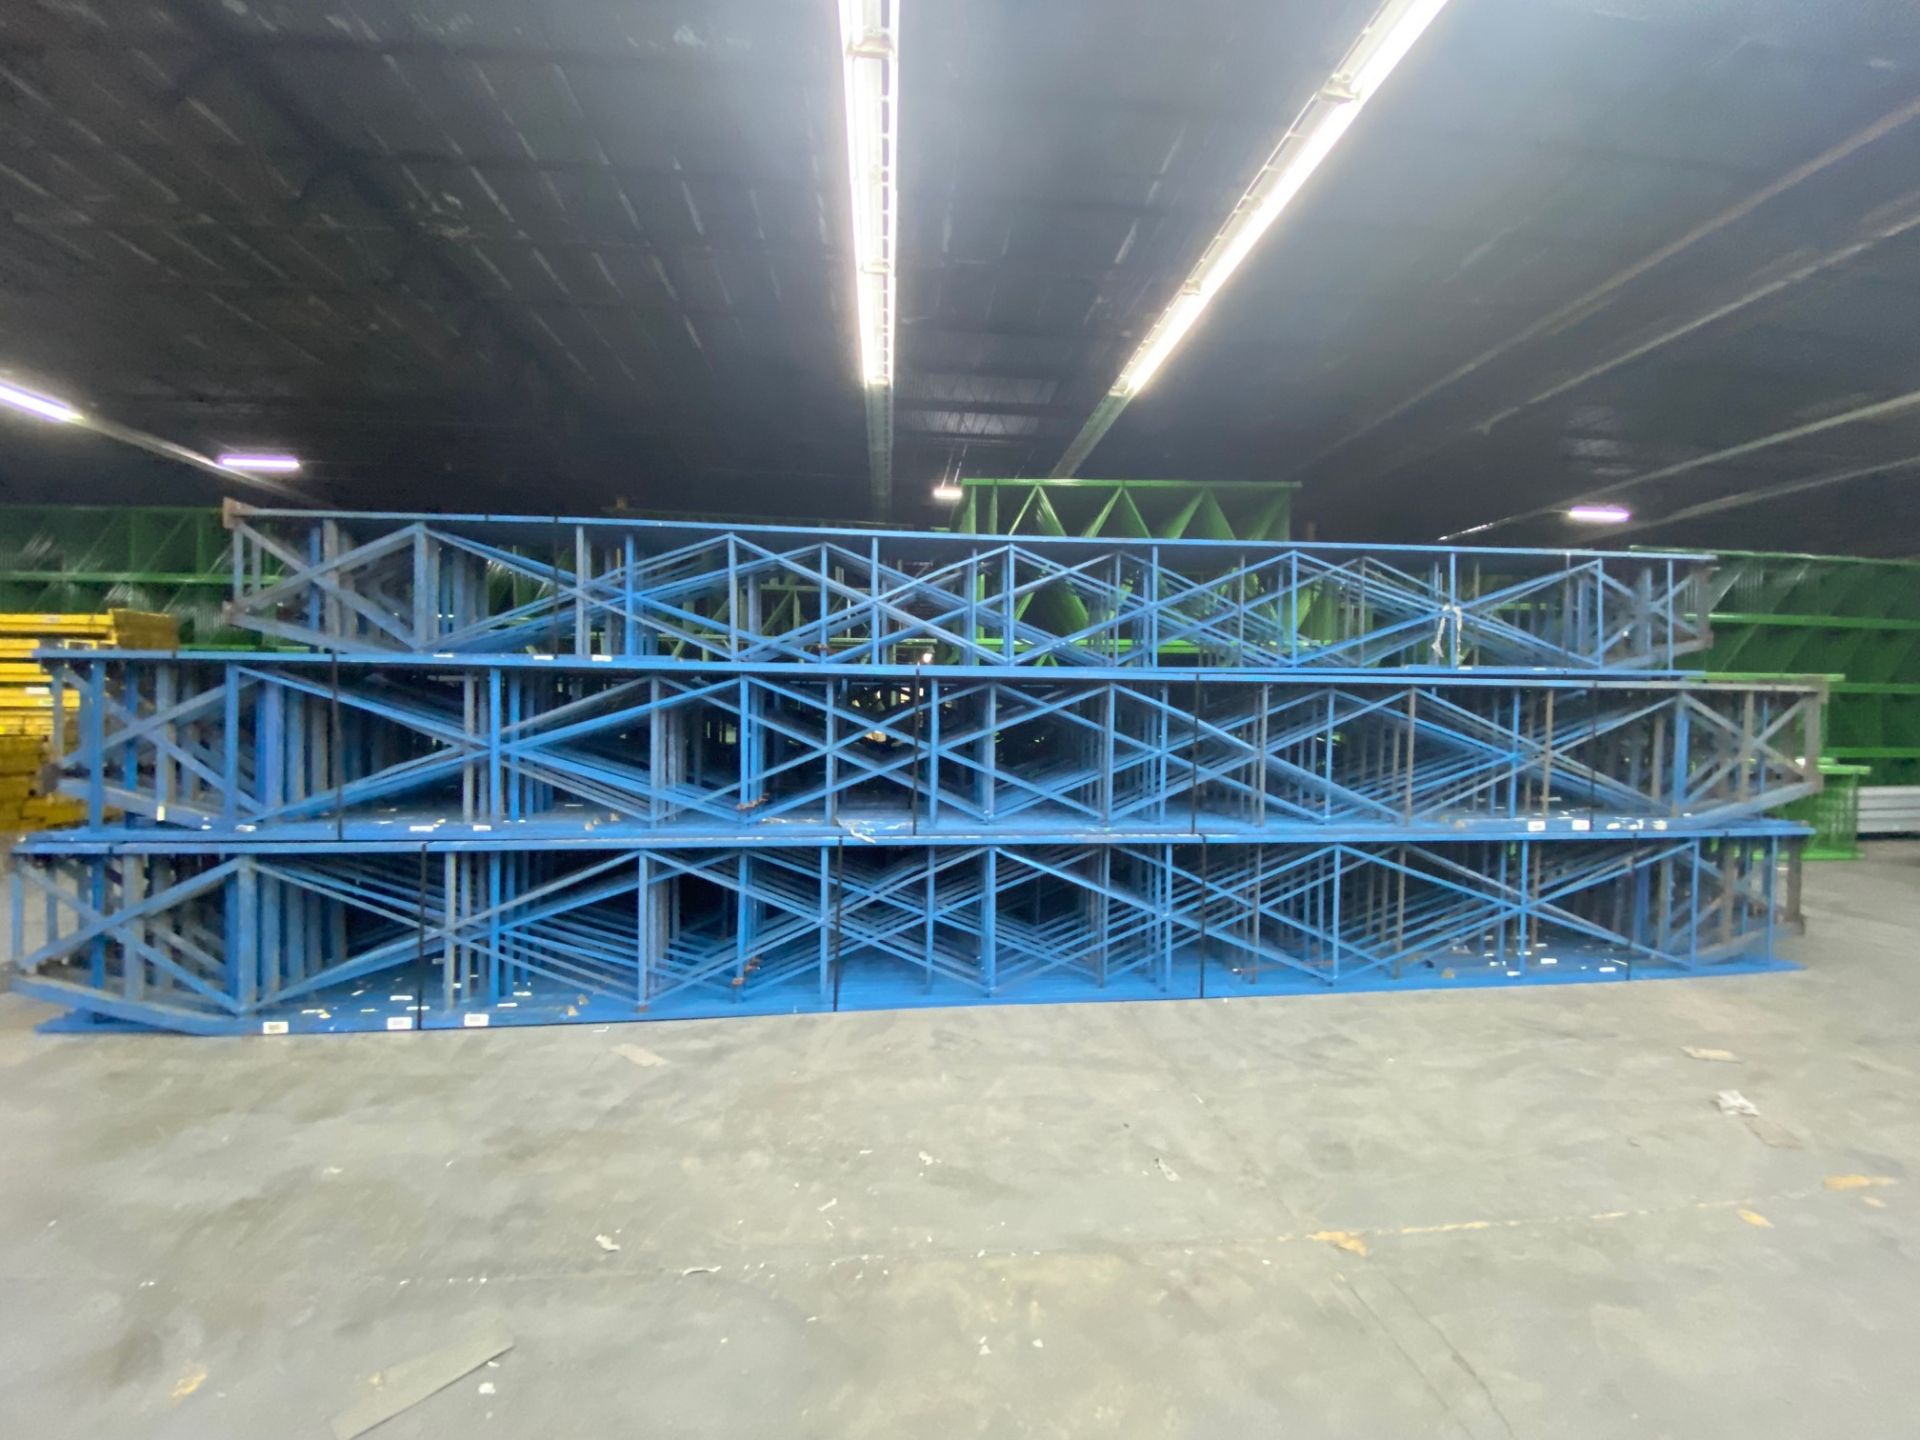 18 BAYS OF STRUCTURAL STYLE PALLET RACKS - 9 BAYS X 2 LINES X 30'H X 36"D X 112"W